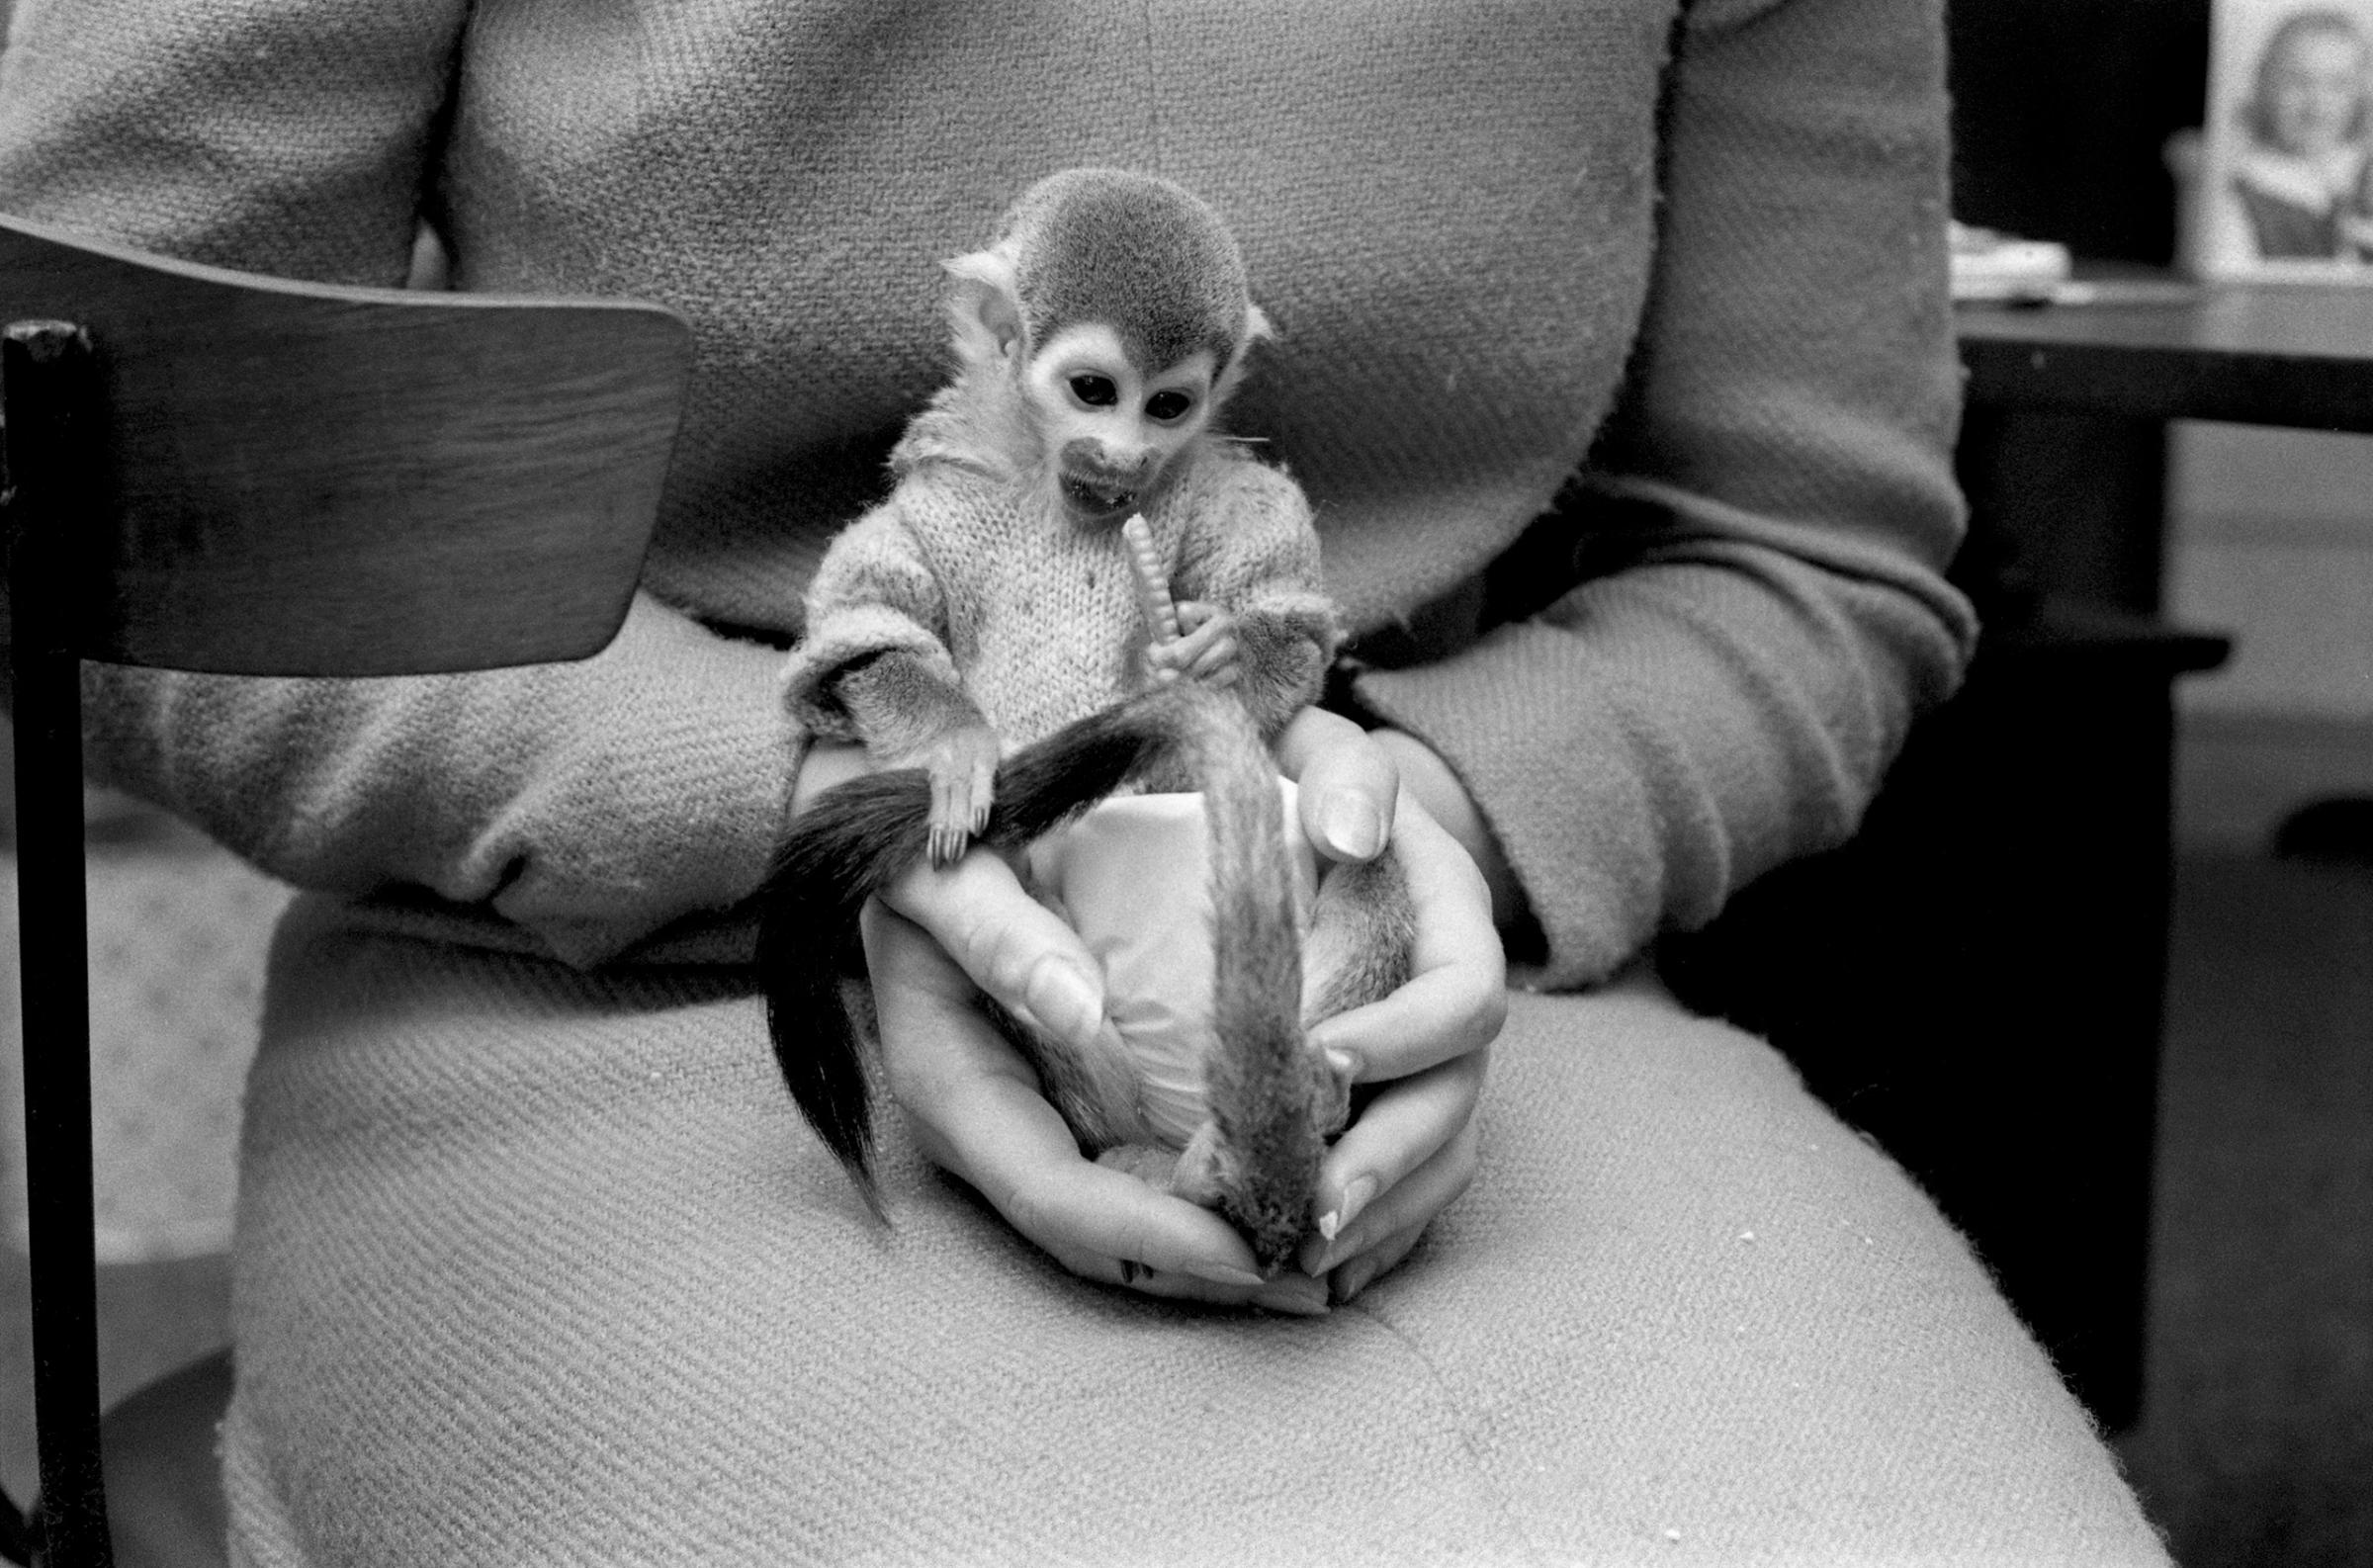 Squirrel monkey at the Boston chapter of the Simian Society of America.